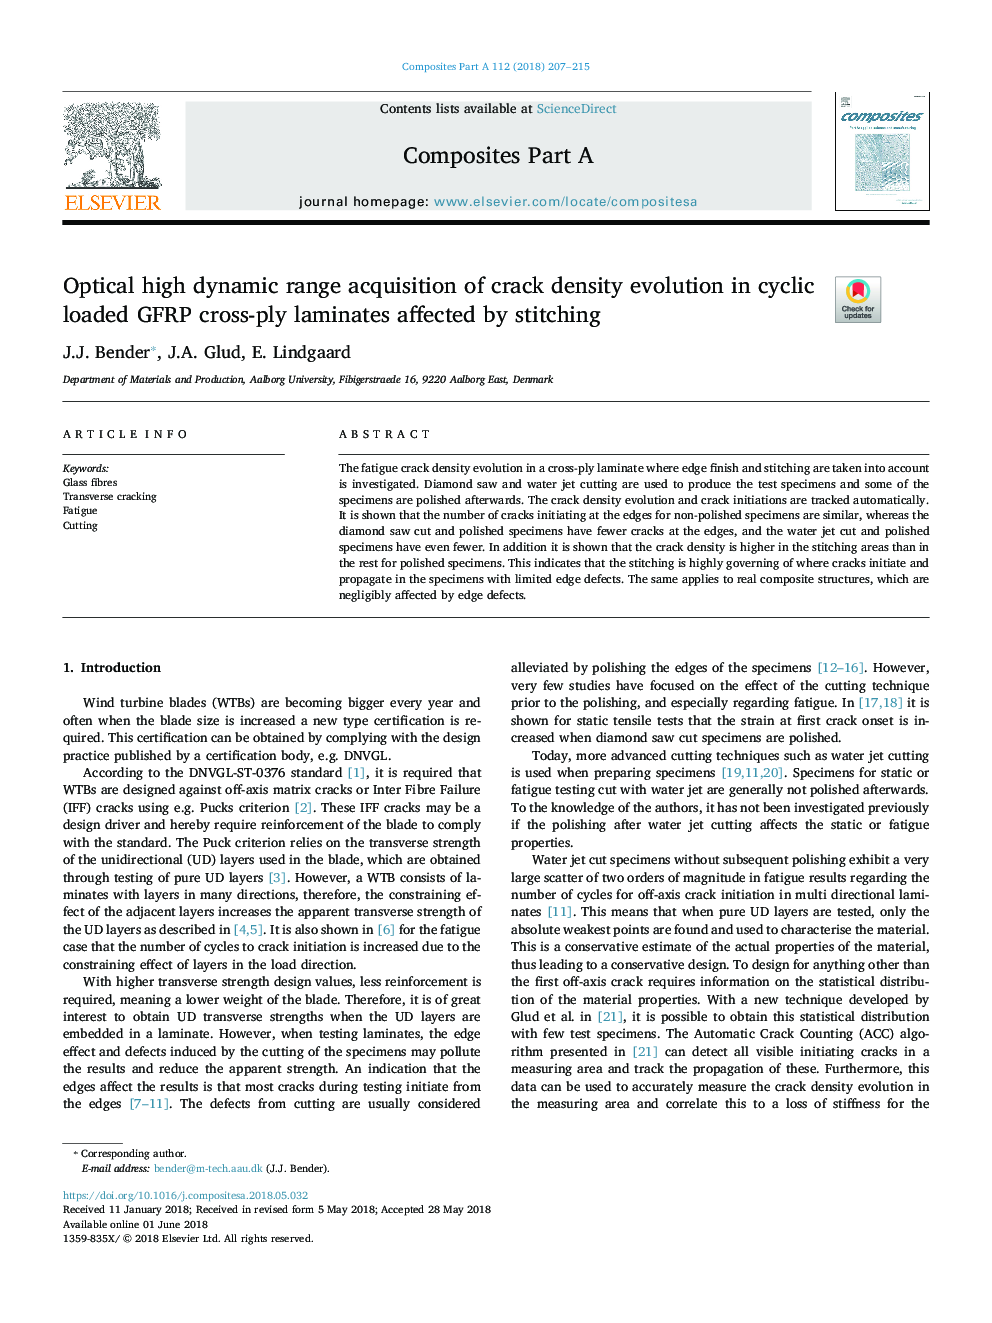 Optical high dynamic range acquisition of crack density evolution in cyclic loaded GFRP cross-ply laminates affected by stitching